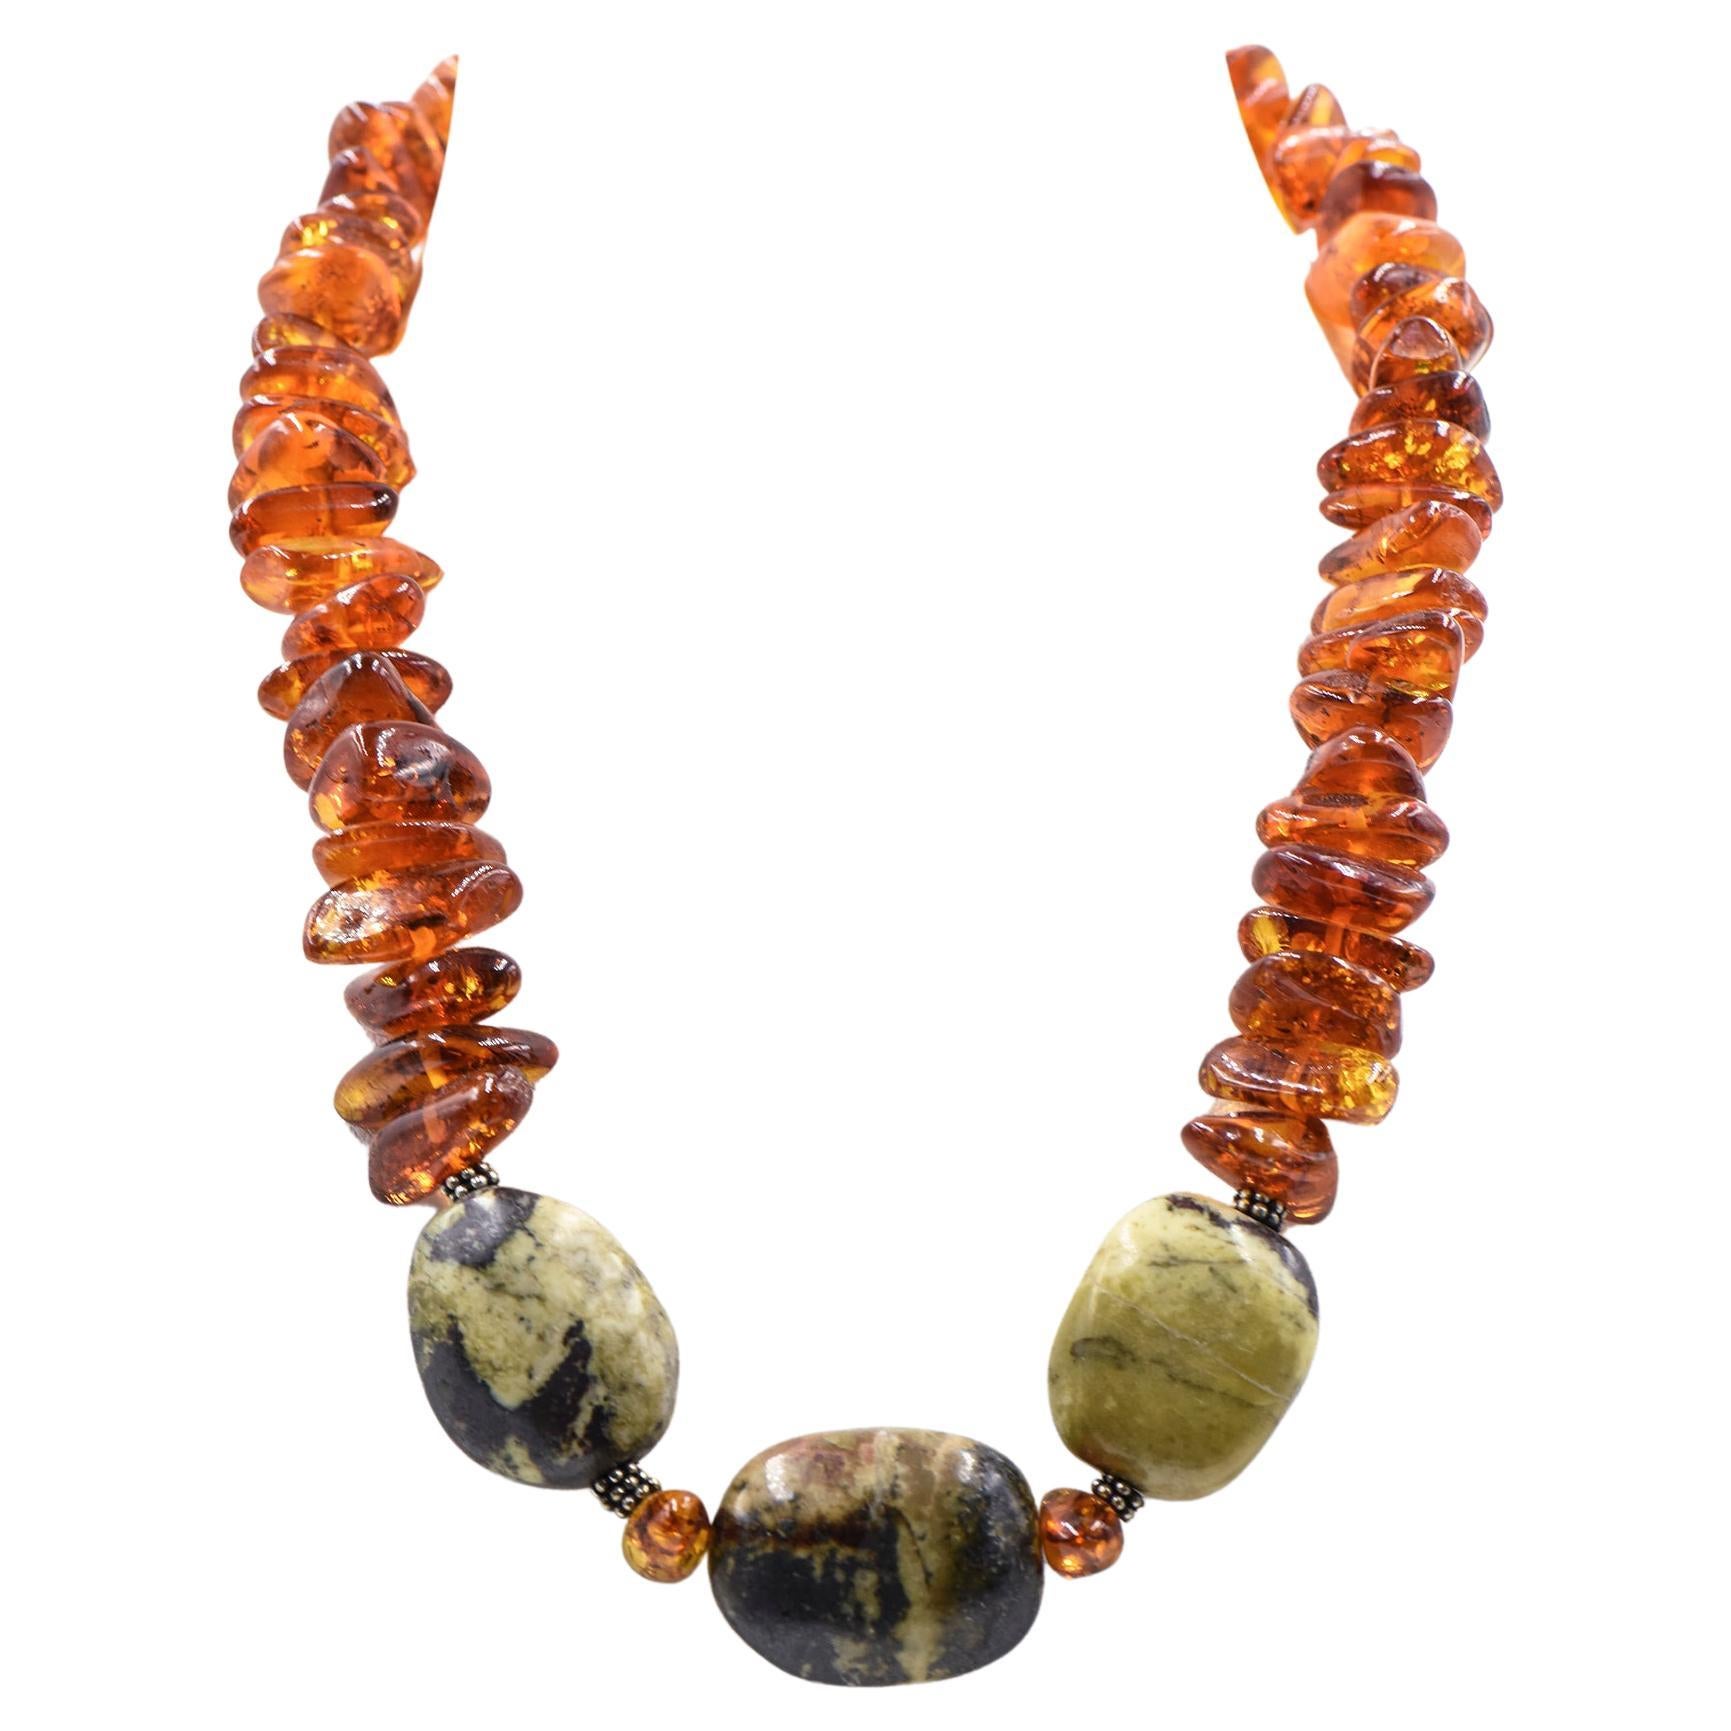 Amber and Green Stone Bead Necklace with Sterling Silver